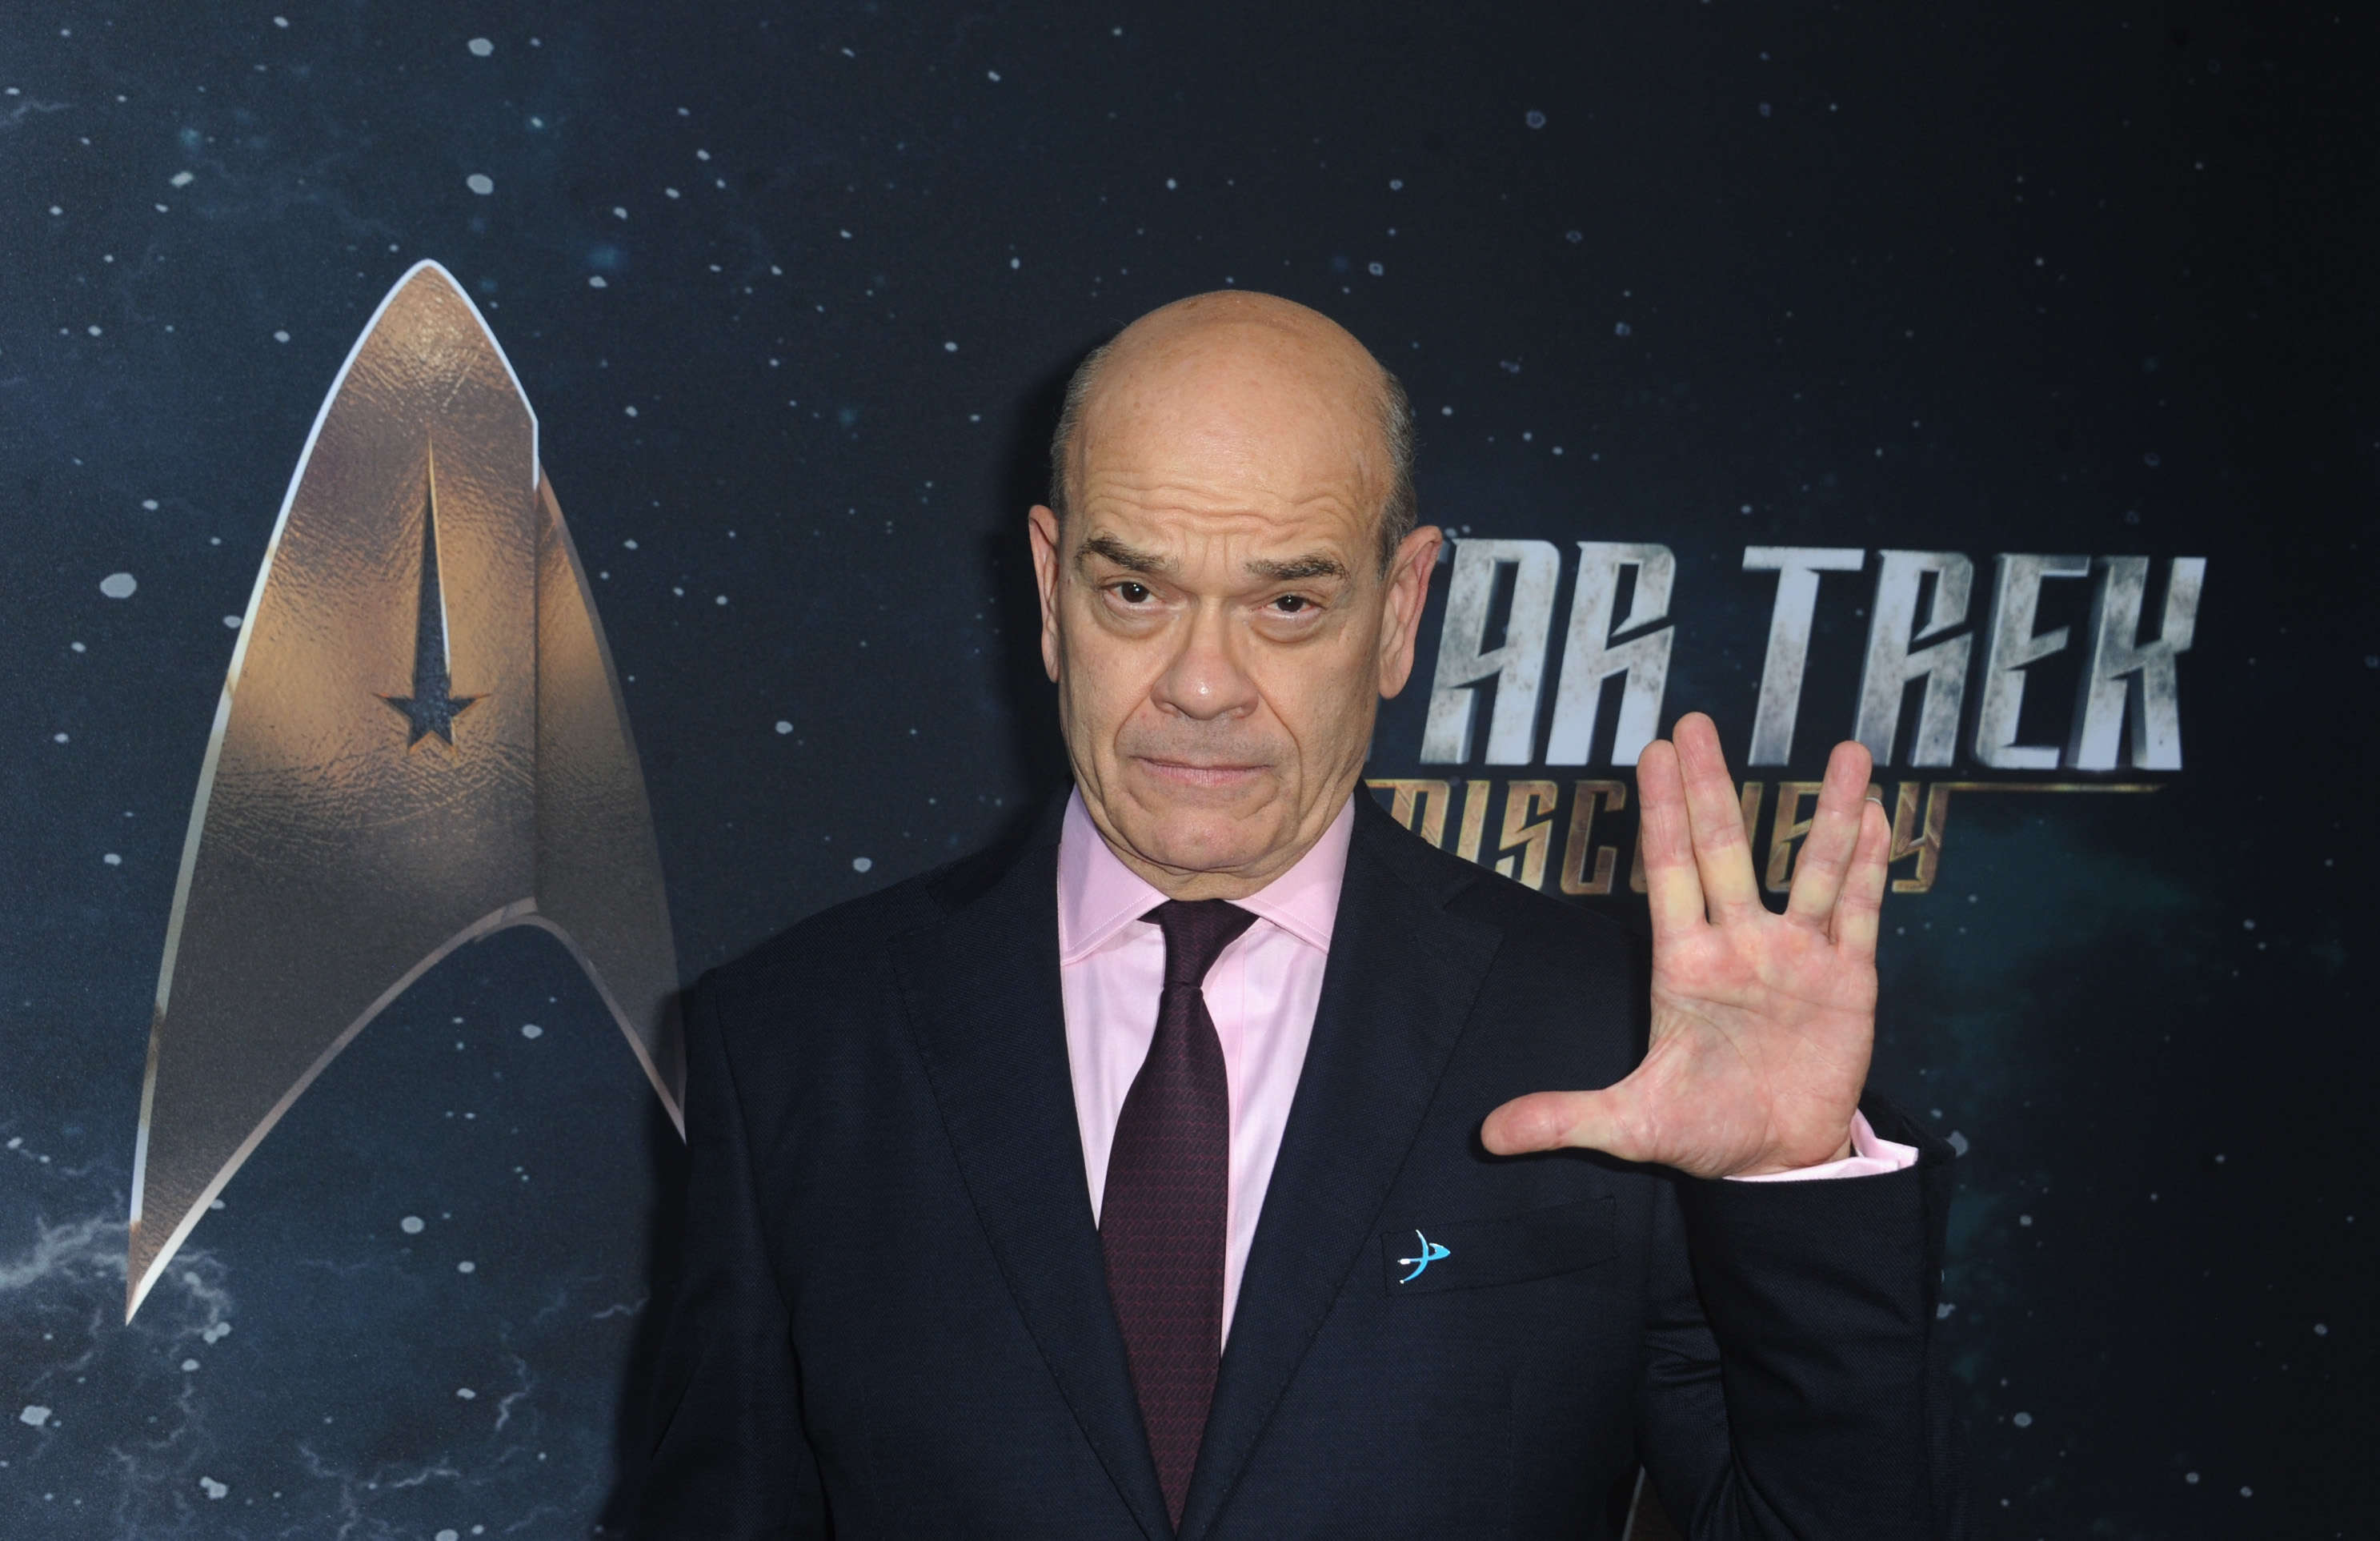 Robert Picardo teases Star Trek Voyager reunion and talks playing the